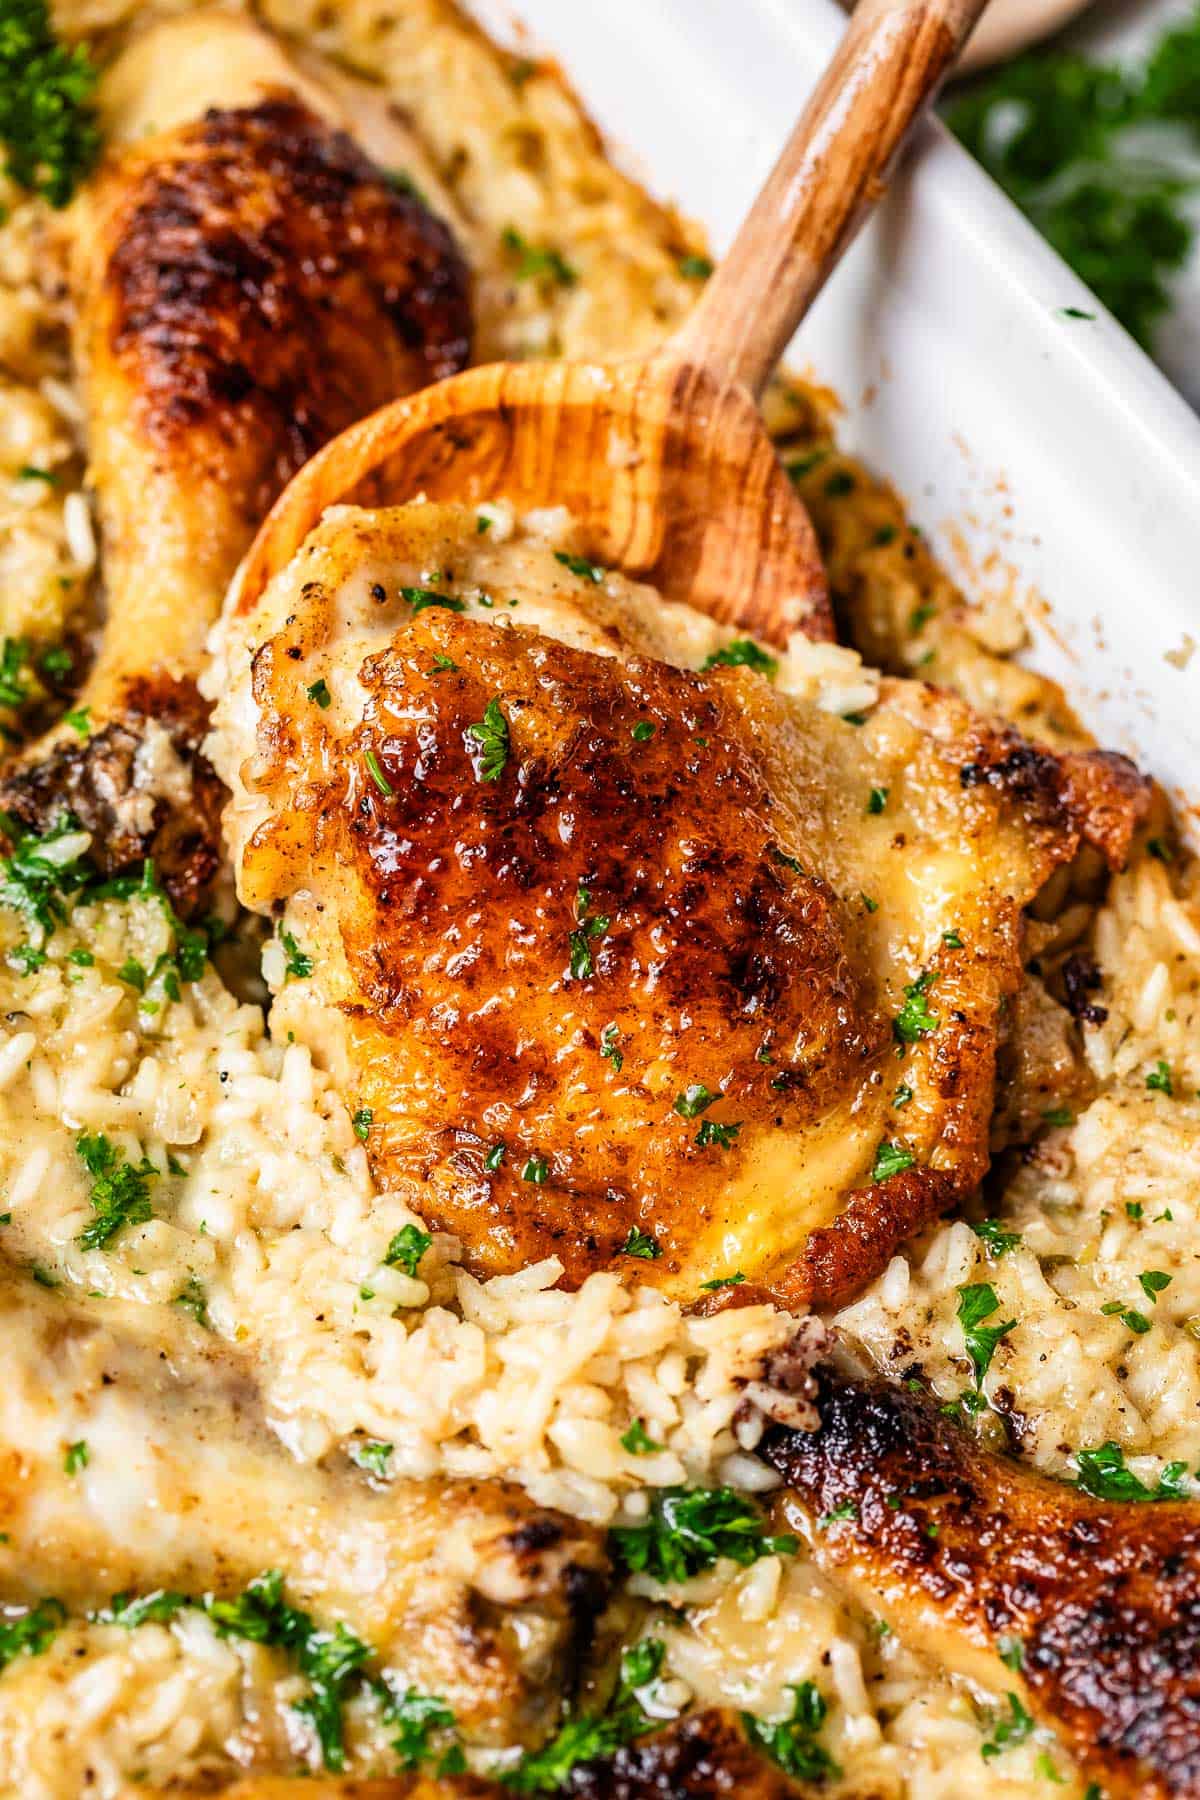 wooden spoon scooping up a cooked chicken thigh from the rice in a casserole dish.